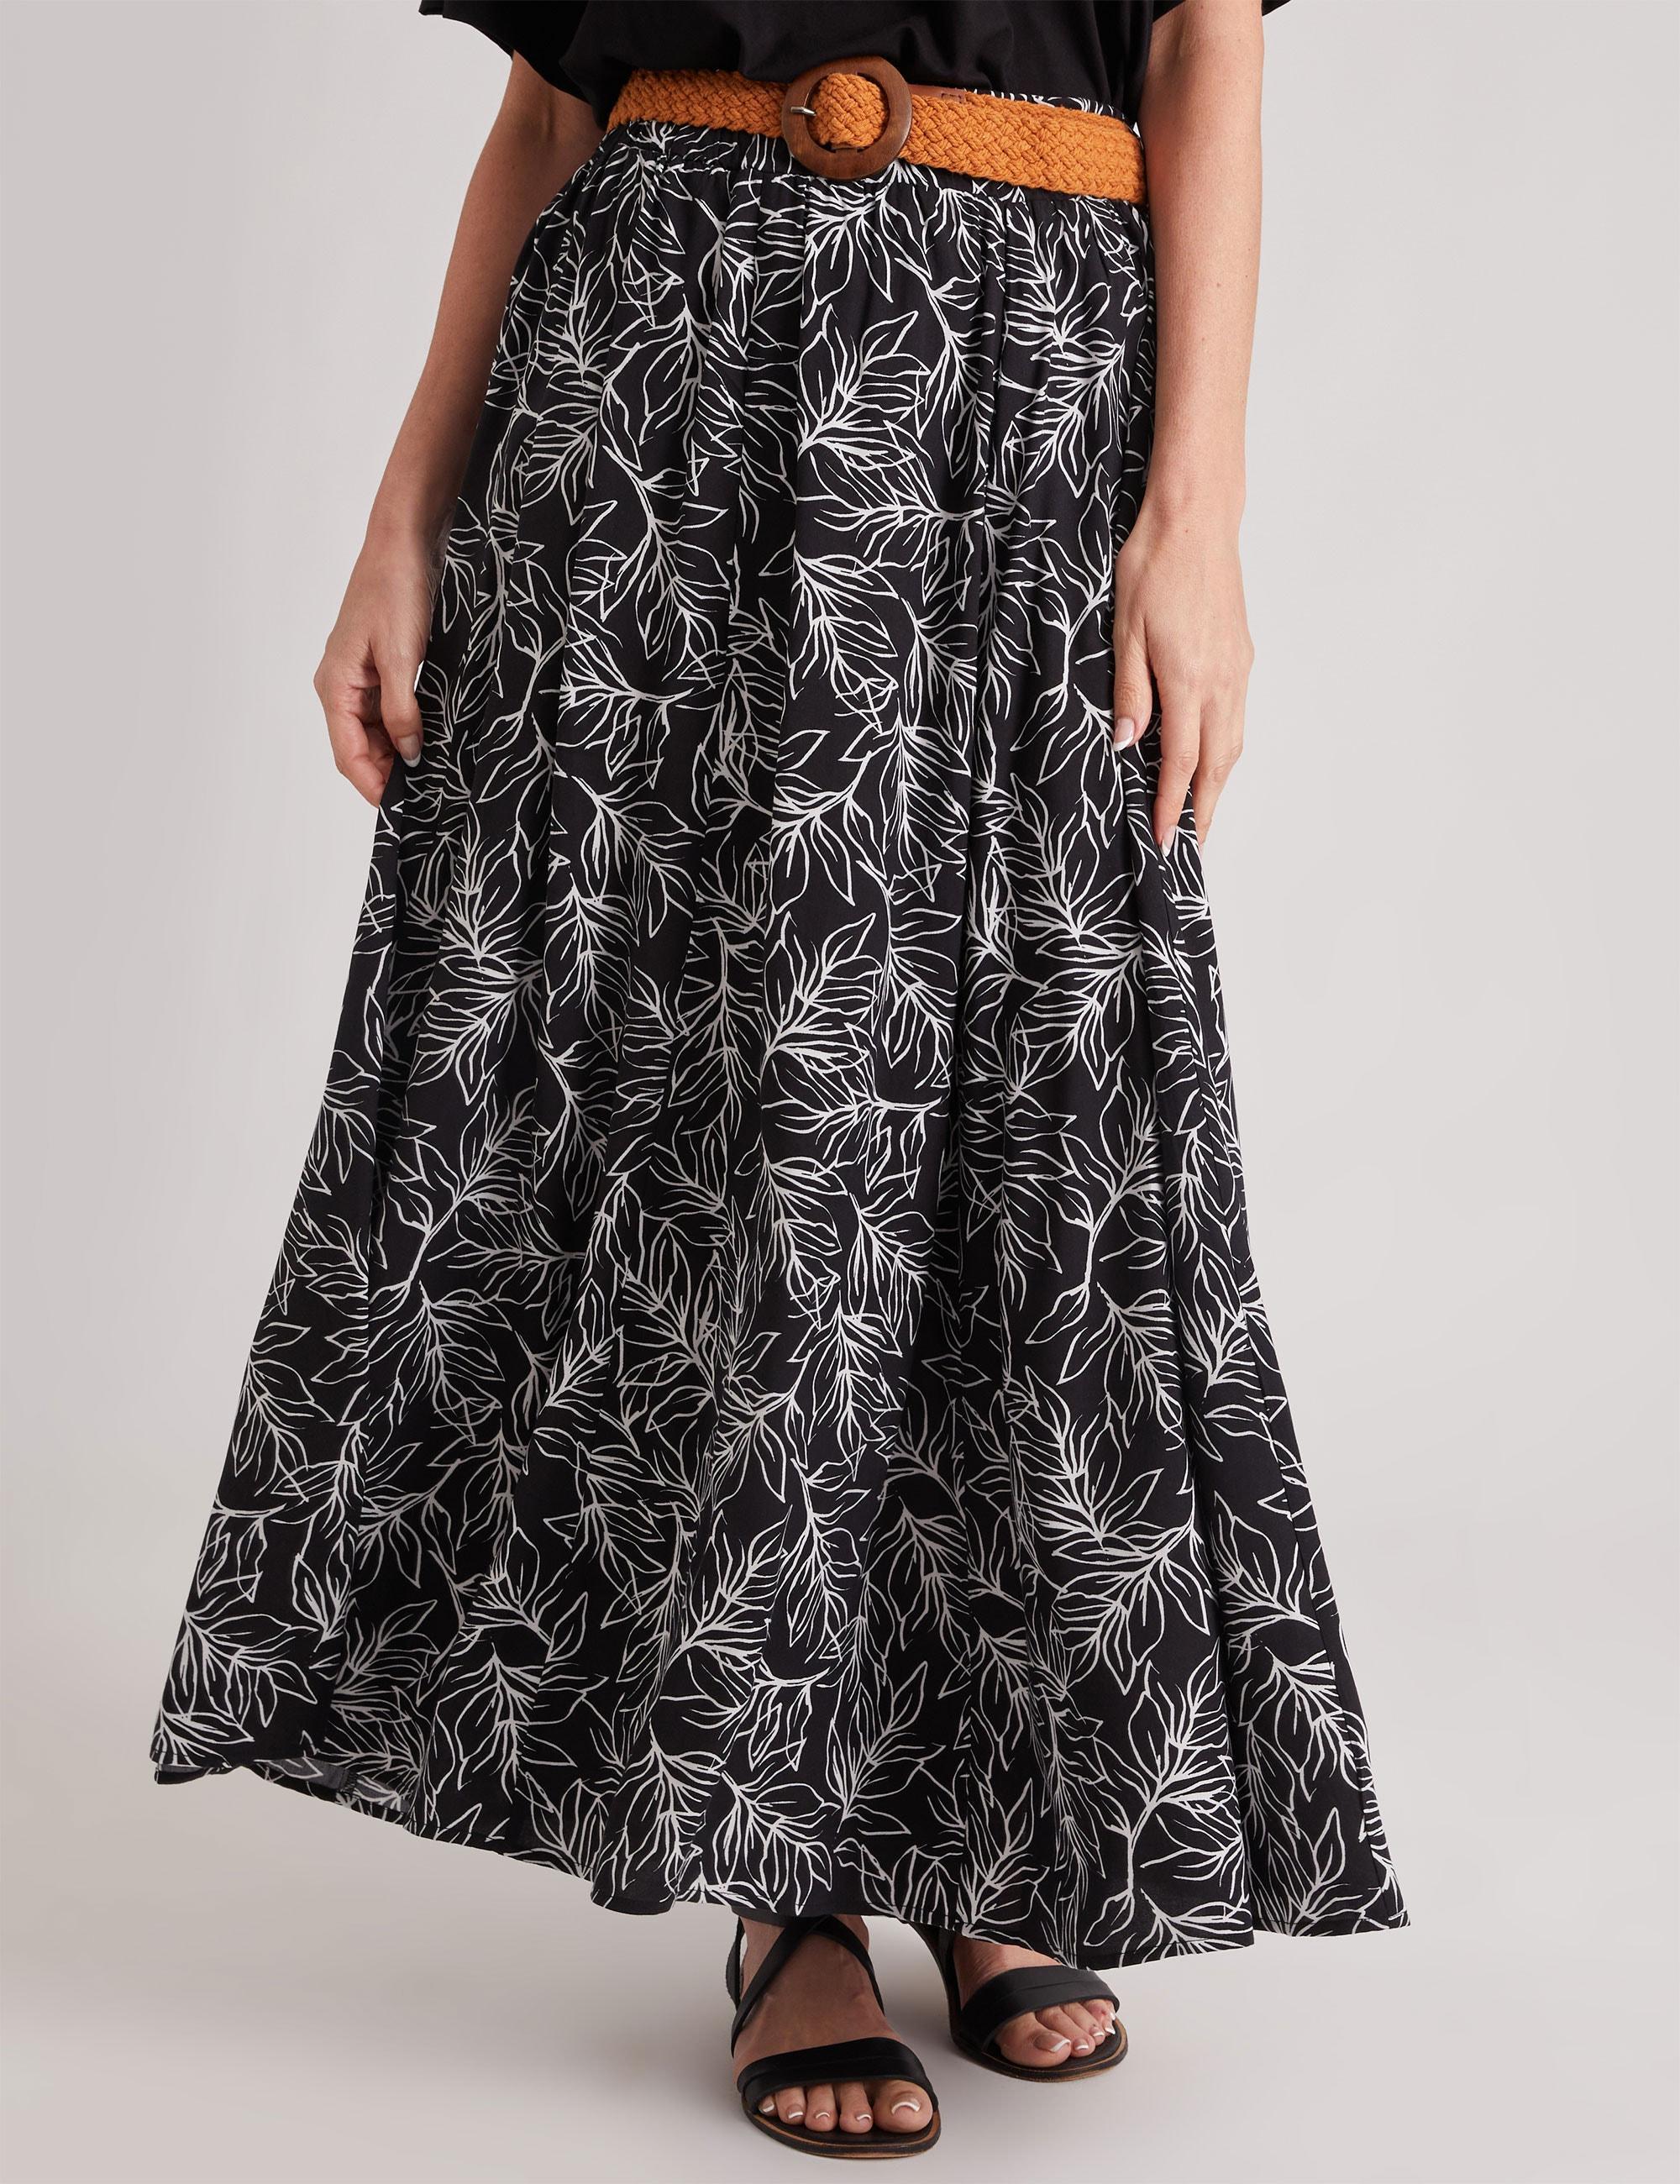 MILLERS - Womens Skirts - Maxi - Winter - Black - Floral - A Line - Fashion - Oversized - Belted - Long - Casual Work Clothes - Quality Office Wear